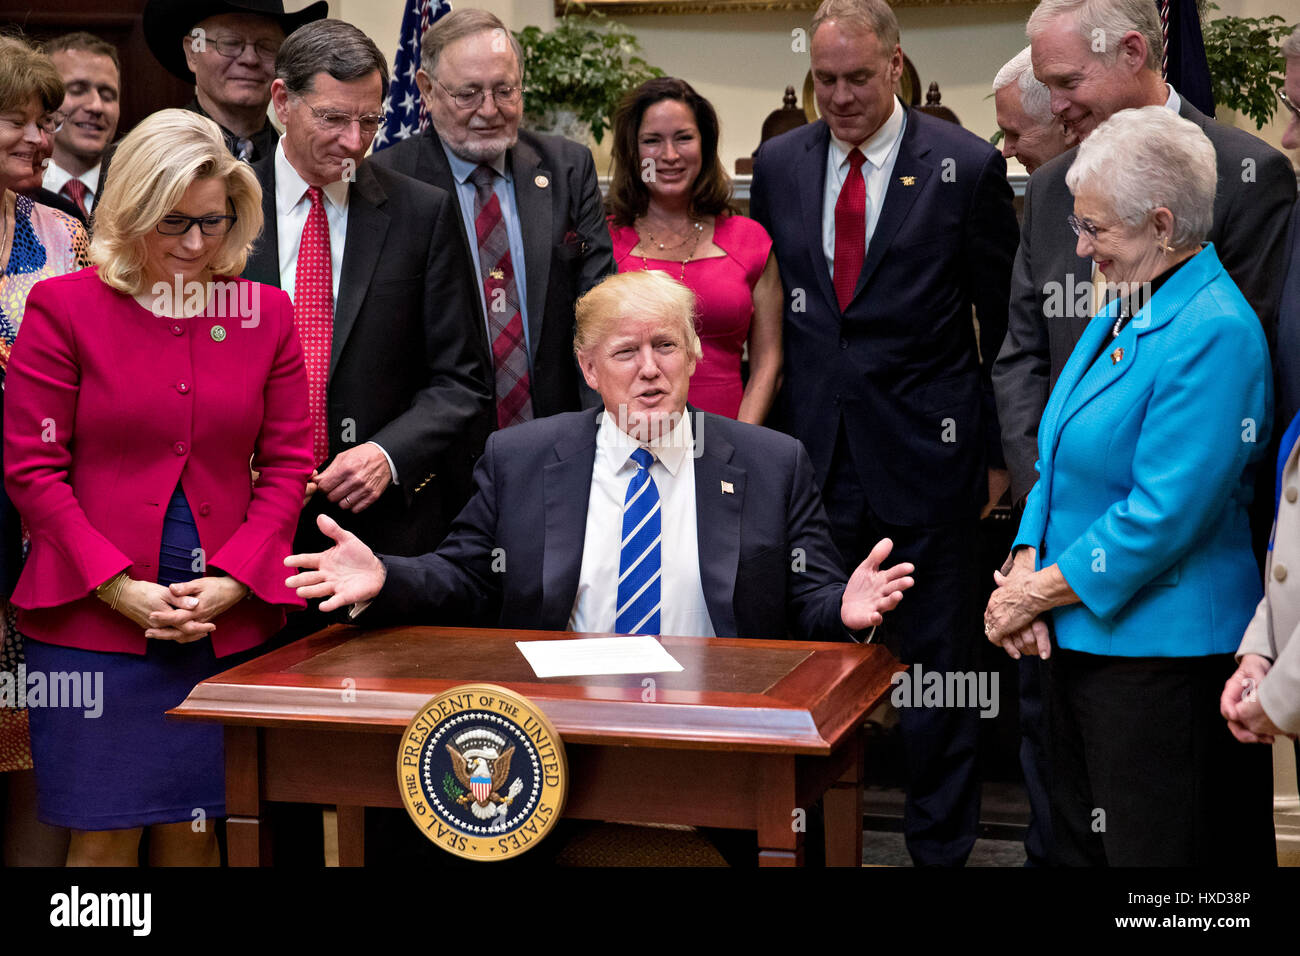 Washington DC, USA. 27th March, 2017. United States President Donald Trump speaks during a bill signing ceremony in the Roosevelt Room of the White House in Washington, DC, U.S., on Monday, March 27, 2017. Trump signed four bills, H.J. Res 37, H.J. Res 44, H.J. Res. 57 and H.J. Res. 58, that nullify measures put in place during former President Barack Obama's administration. Credit: MediaPunch Inc/Alamy Live News Stock Photo